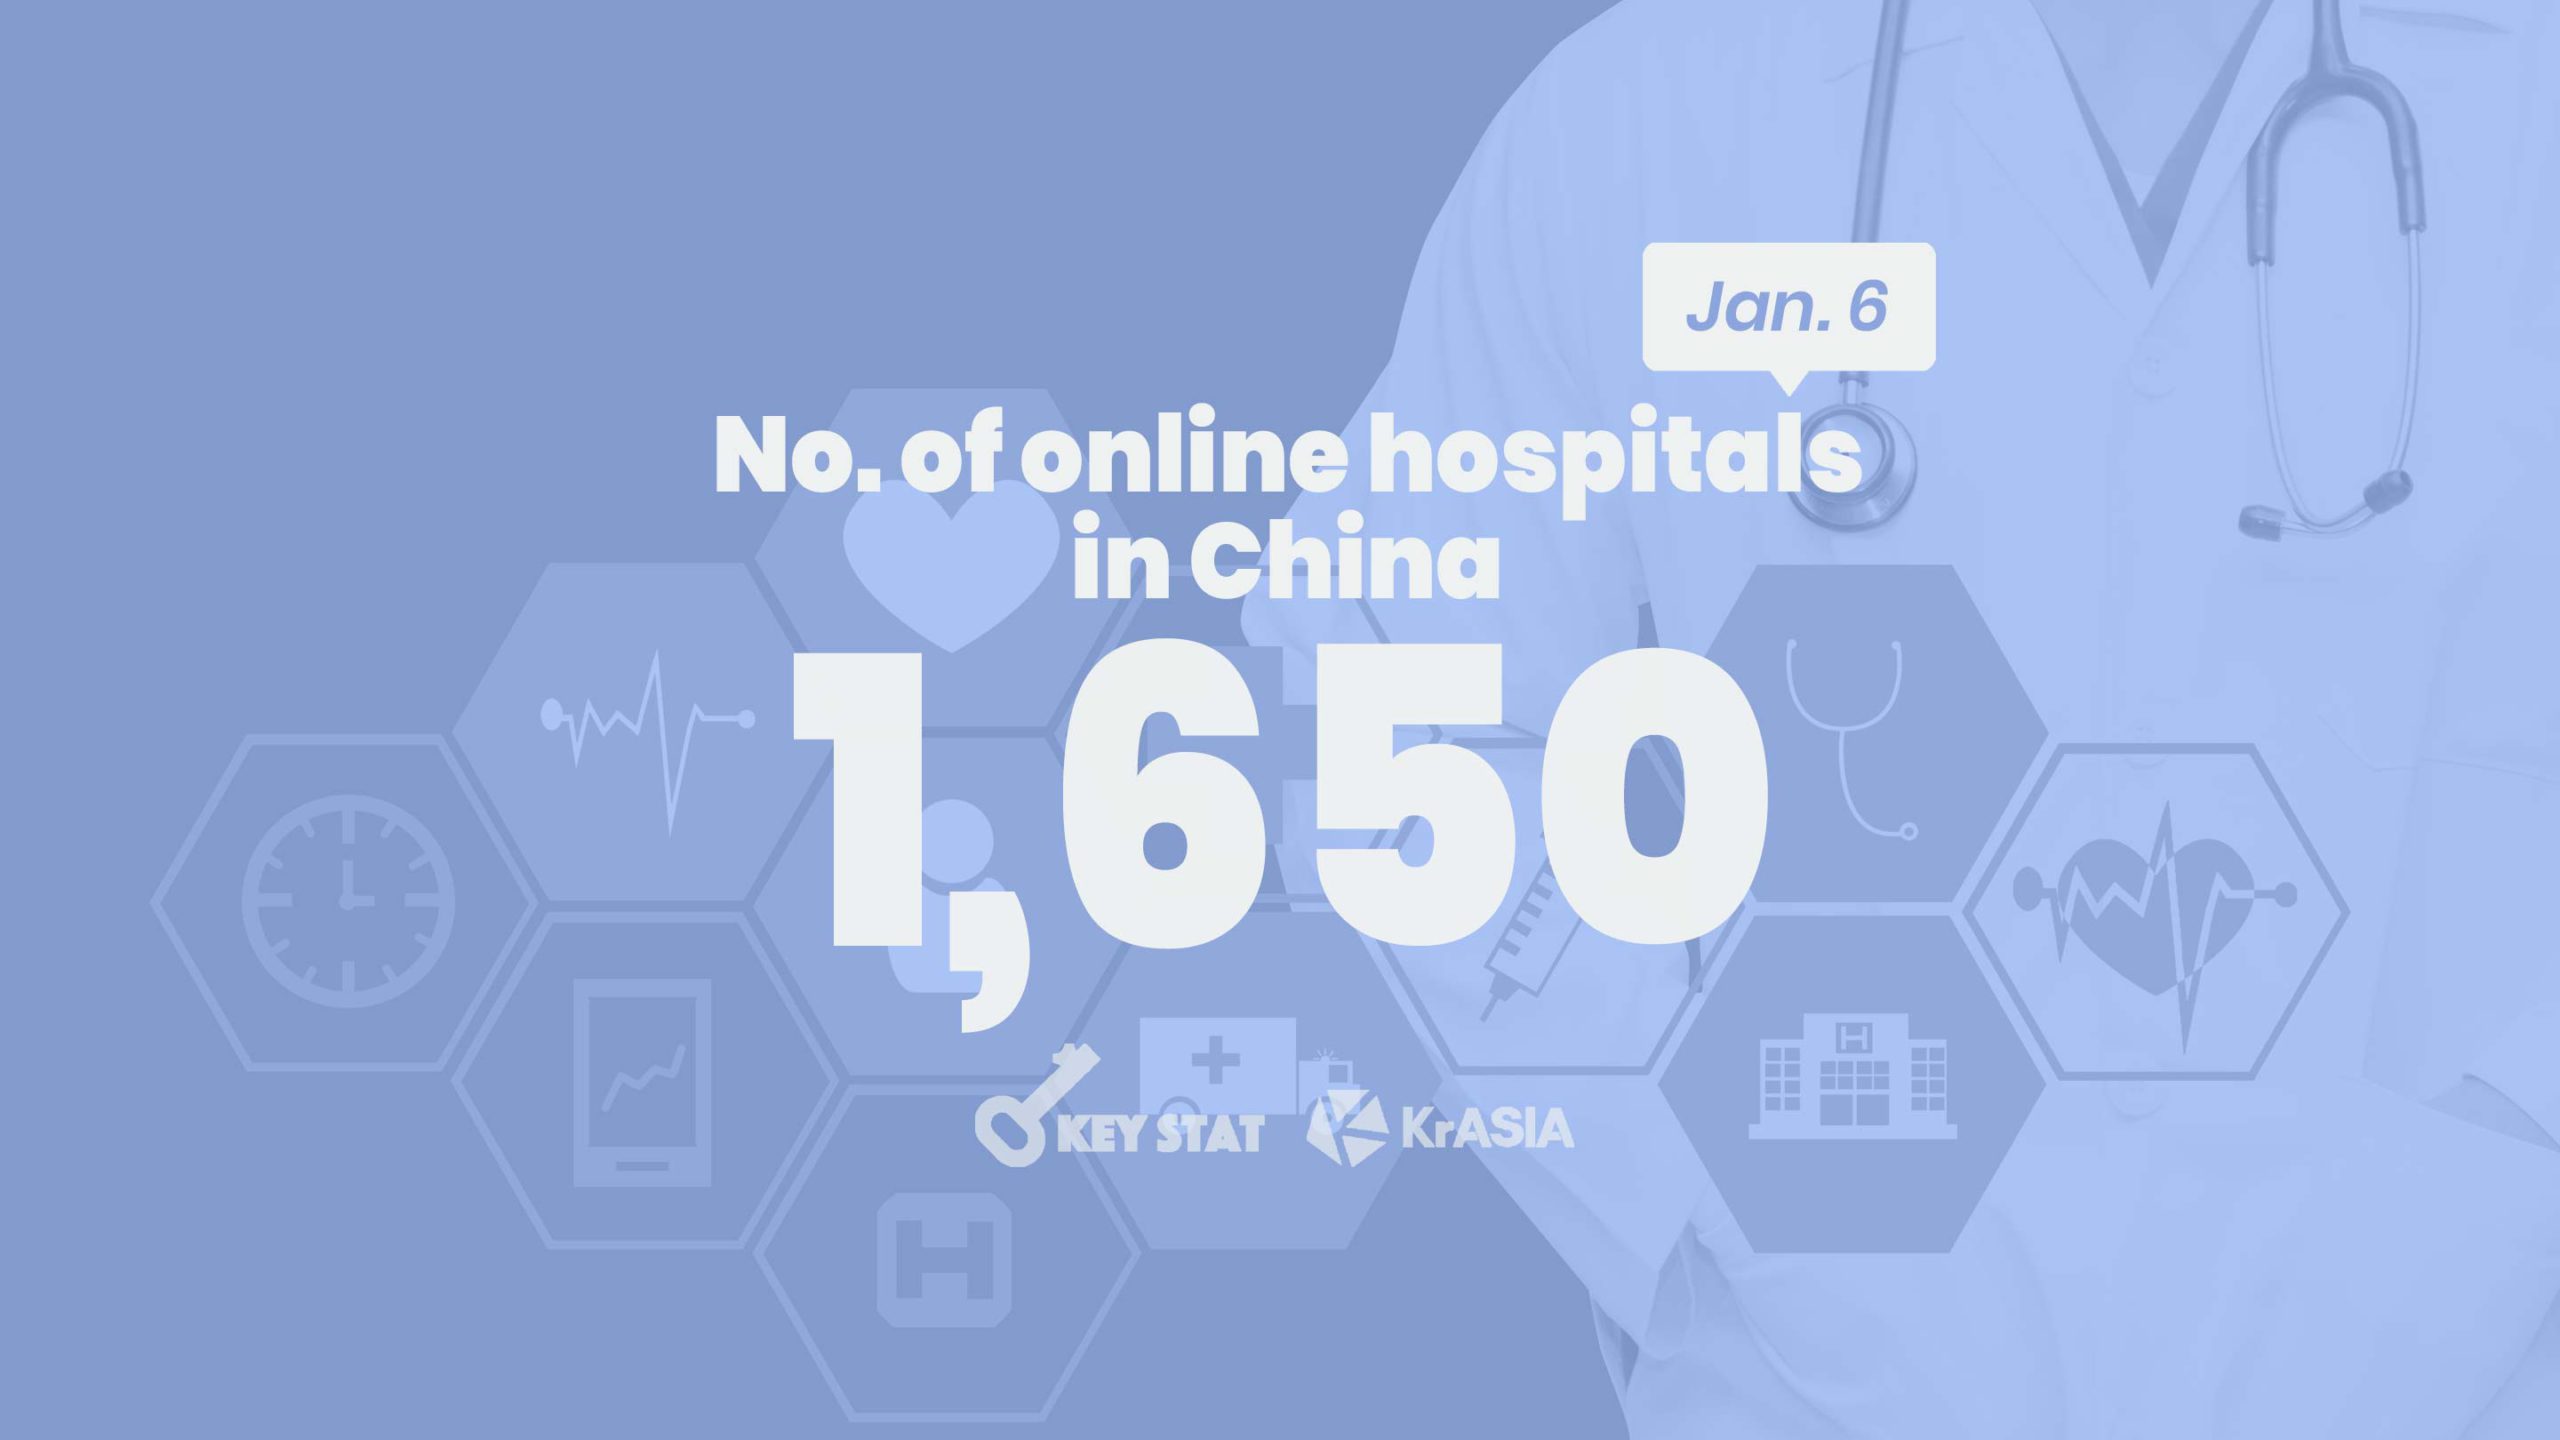 KEY STAT | Number of online hospitals in China increased sixfold last year